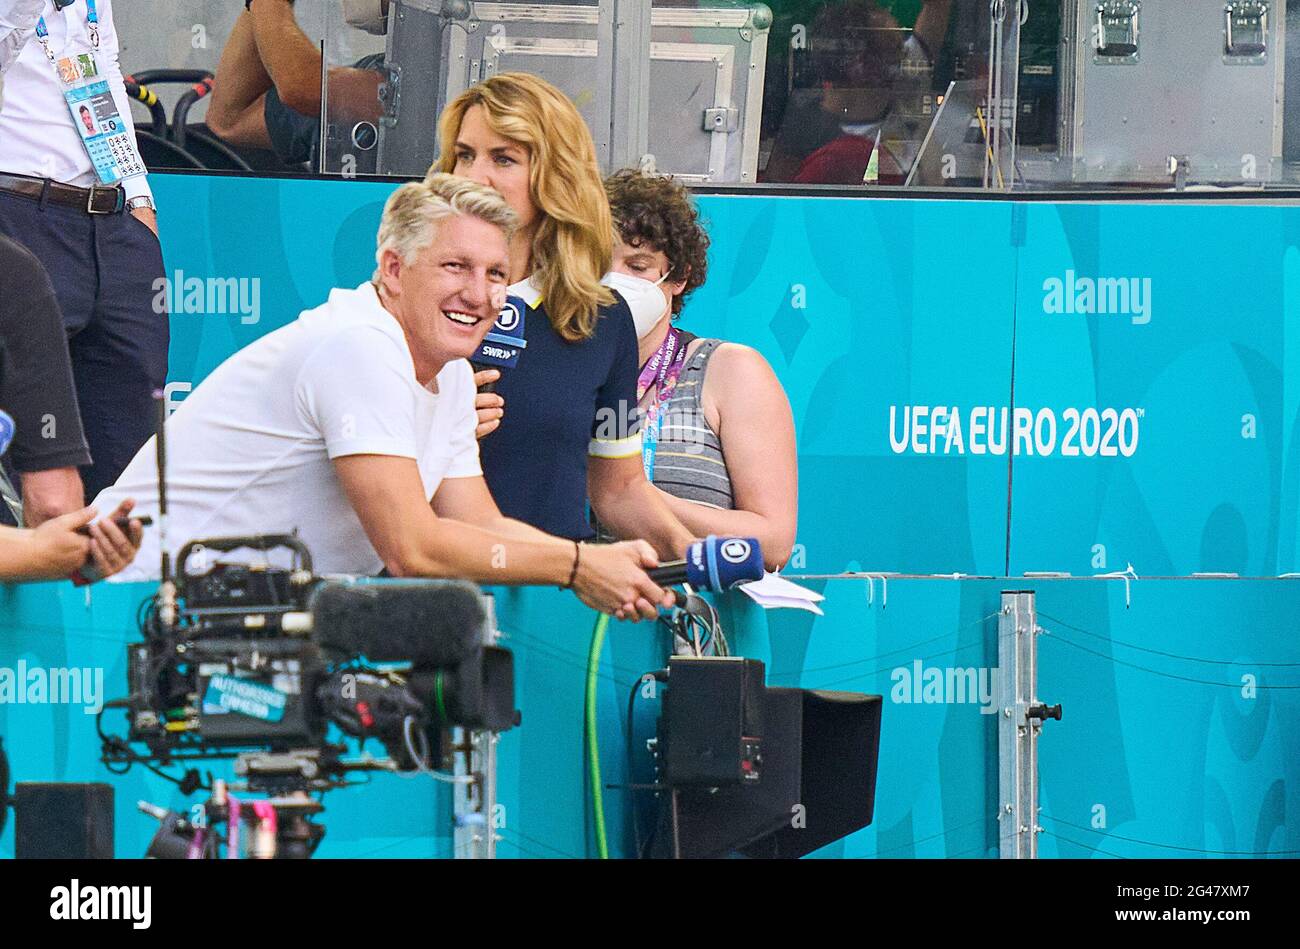 Bastian SCHWEINSTEIGER, ARD Experte  in the Group F match PORTUGAL - GERMANY  at the football UEFA European Championships 2020 in Season 2020/2021 on June 19, 2021  in Munich, Germany. © Peter Schatz / Alamy Live News Stock Photo